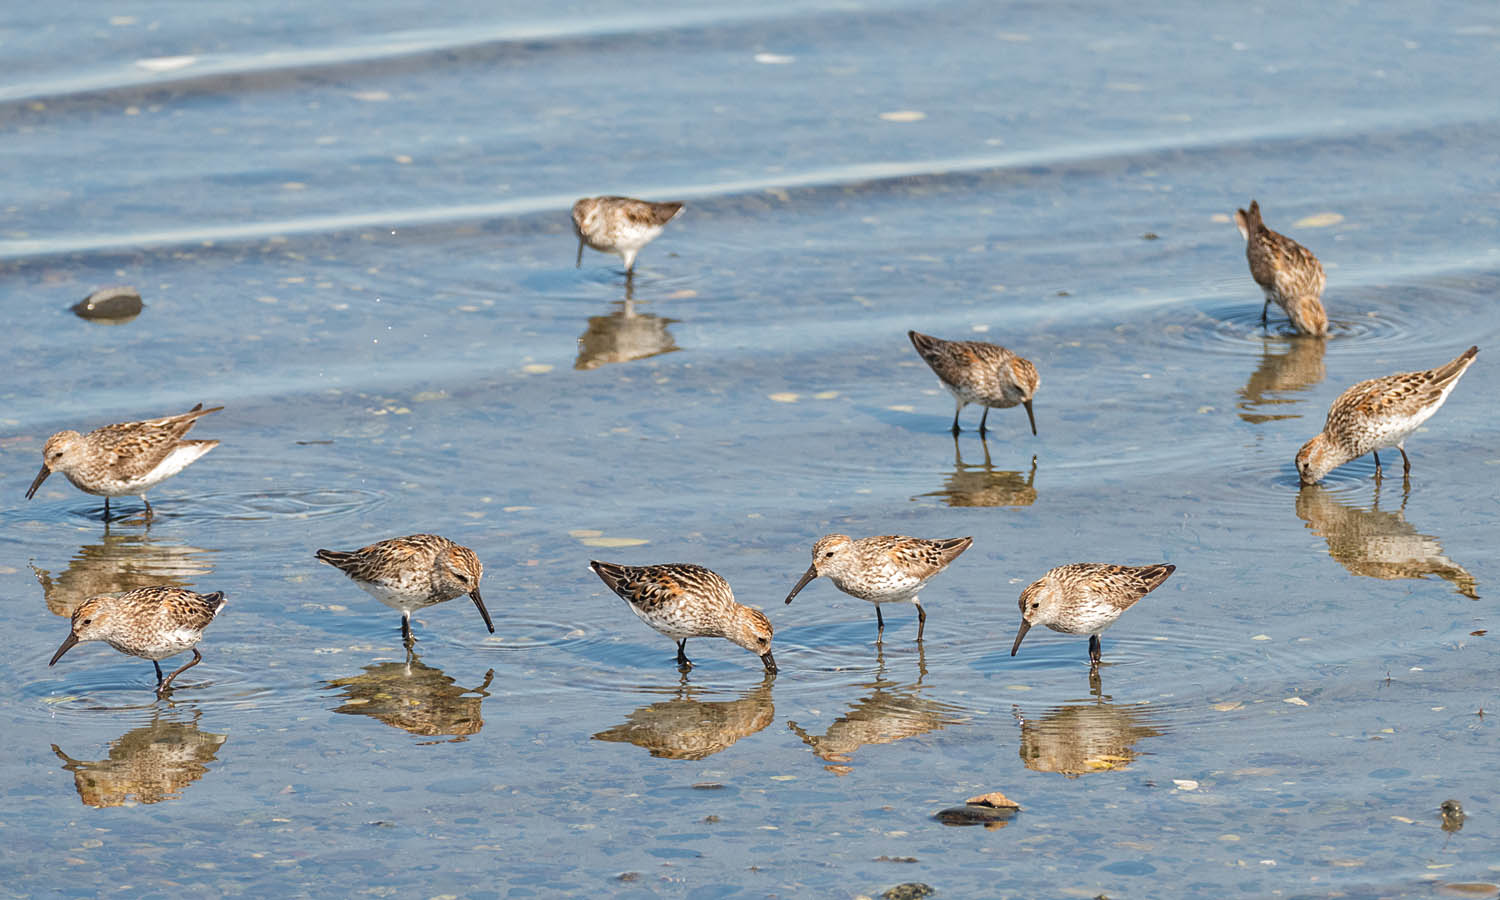 A group of Western Sandpipers feeding.